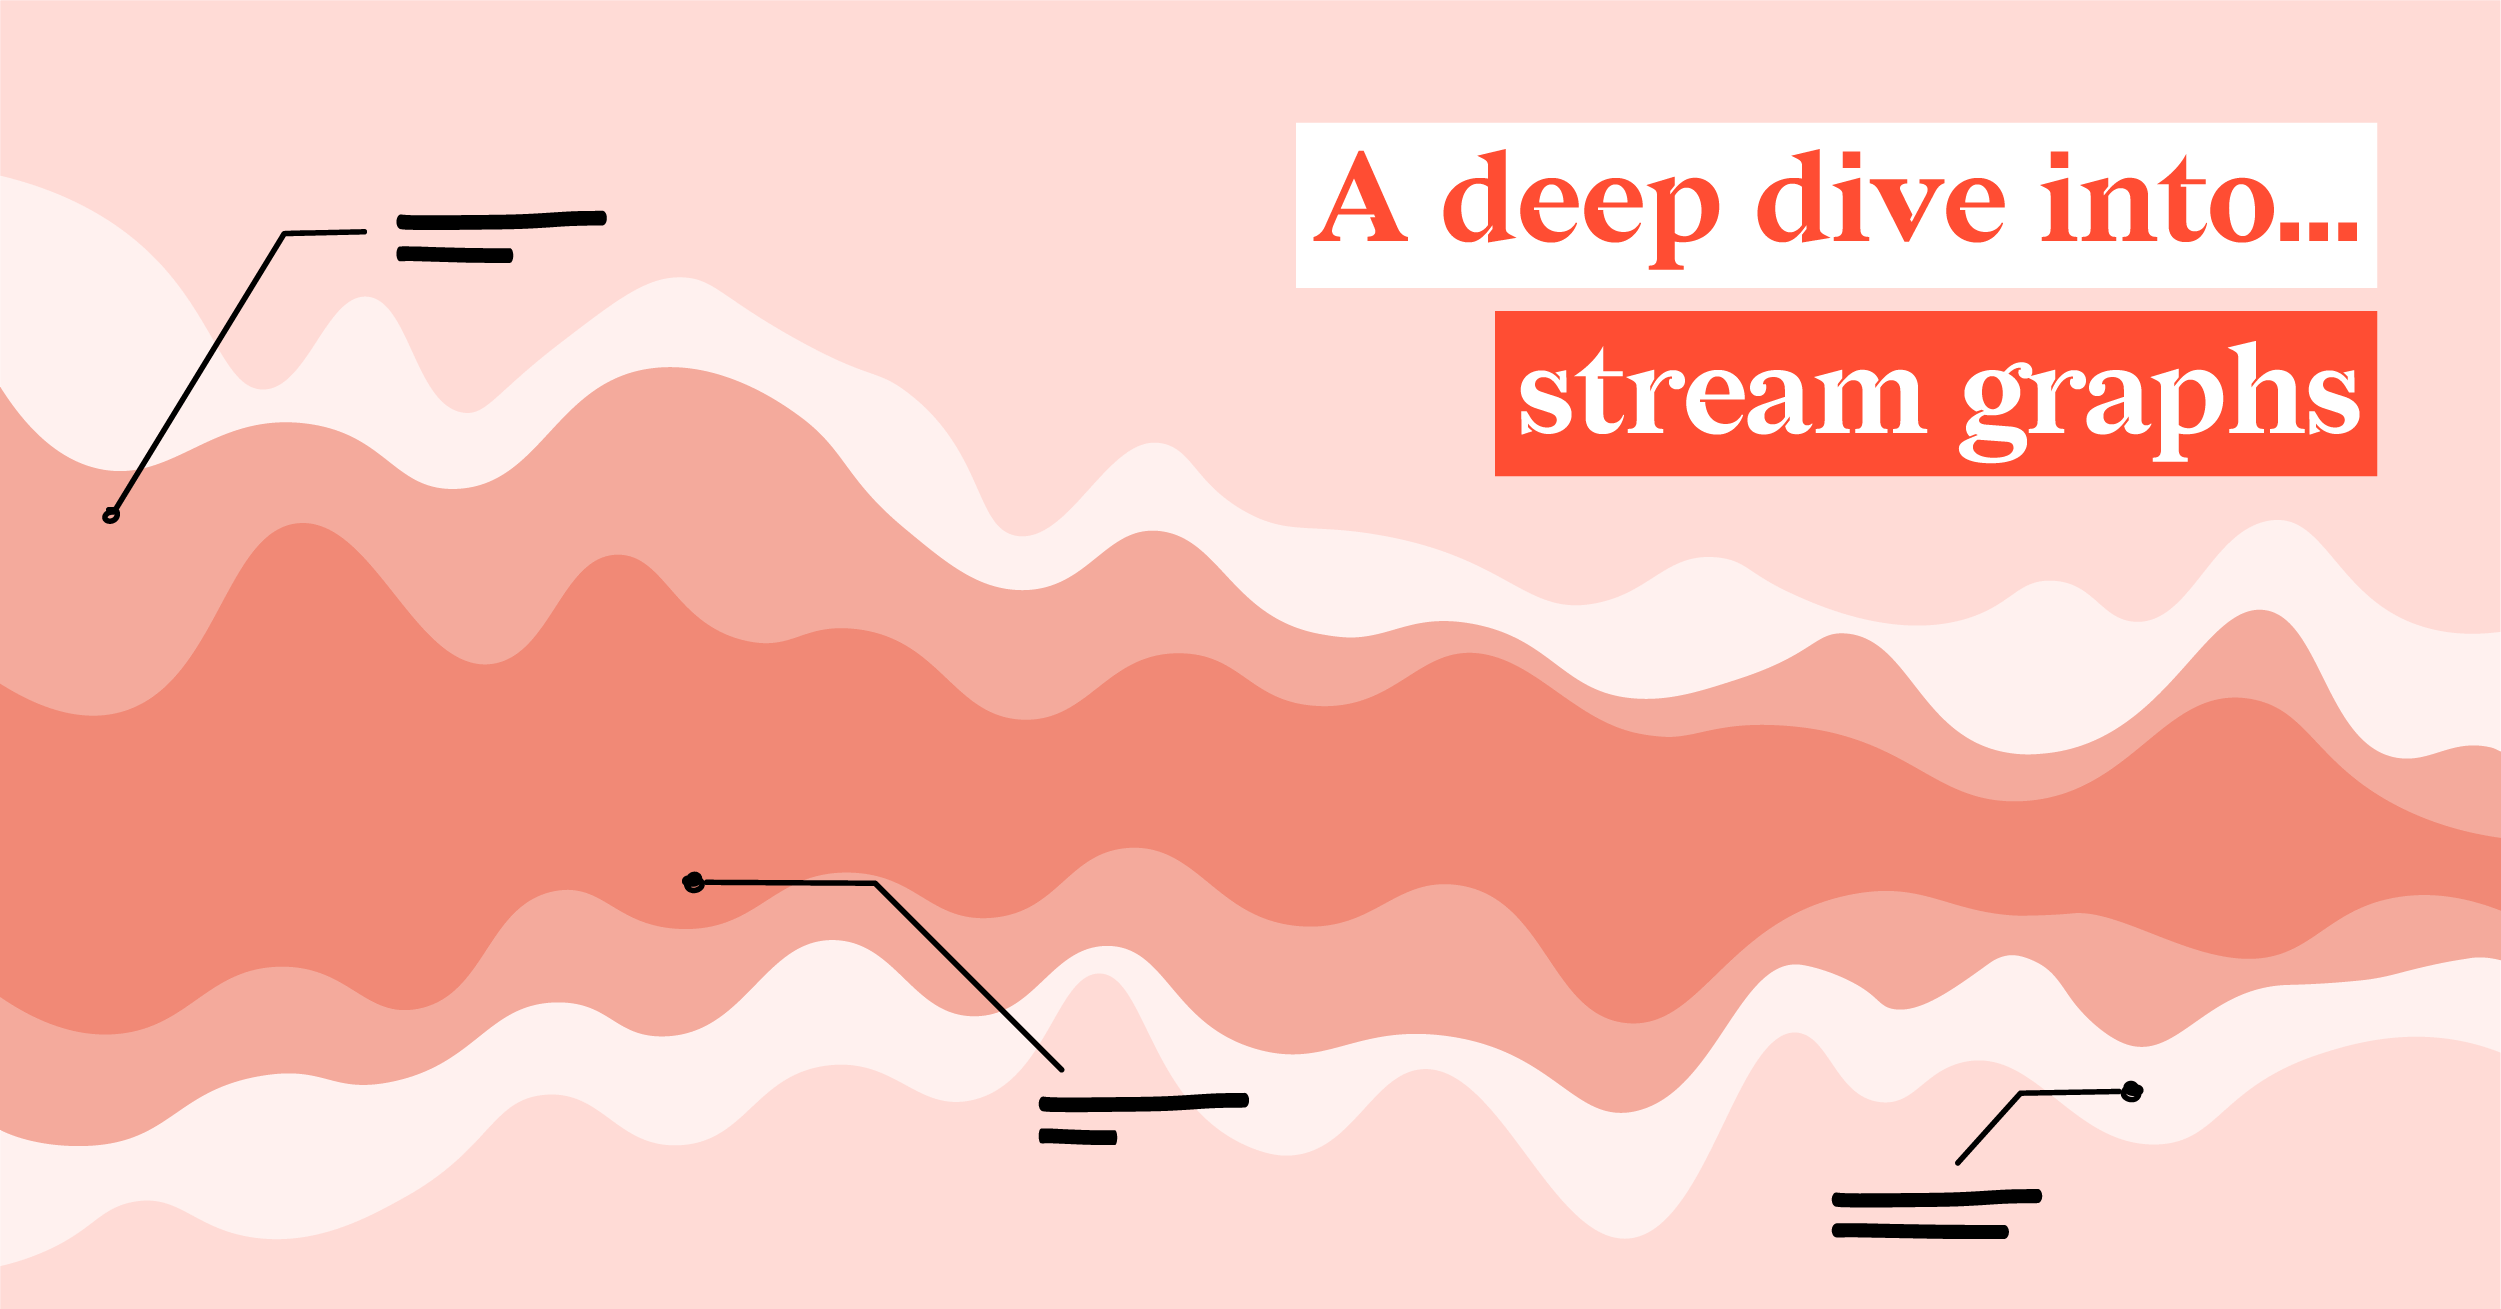 The featured image of this blog article shows a pale red background and a conceptualized example of a stream graph. The text reads 